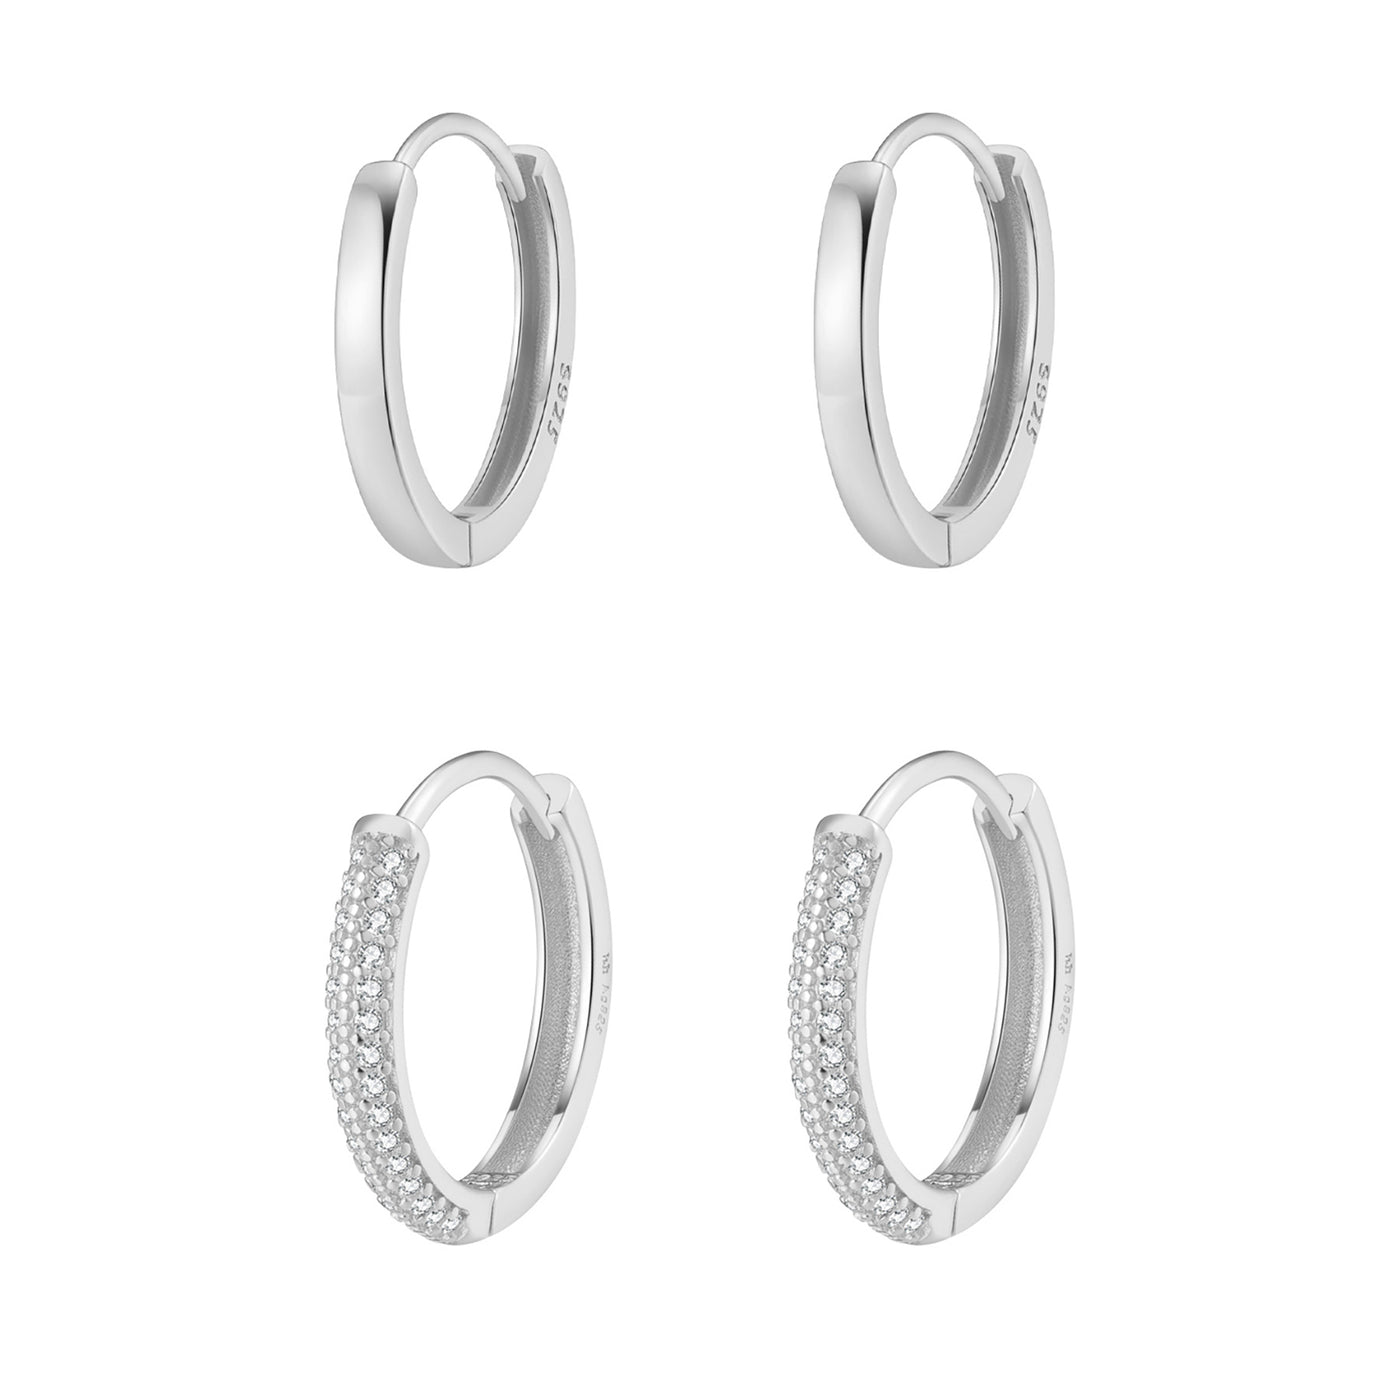 Double Gemstone and Classic Band Hoop Earring Sets